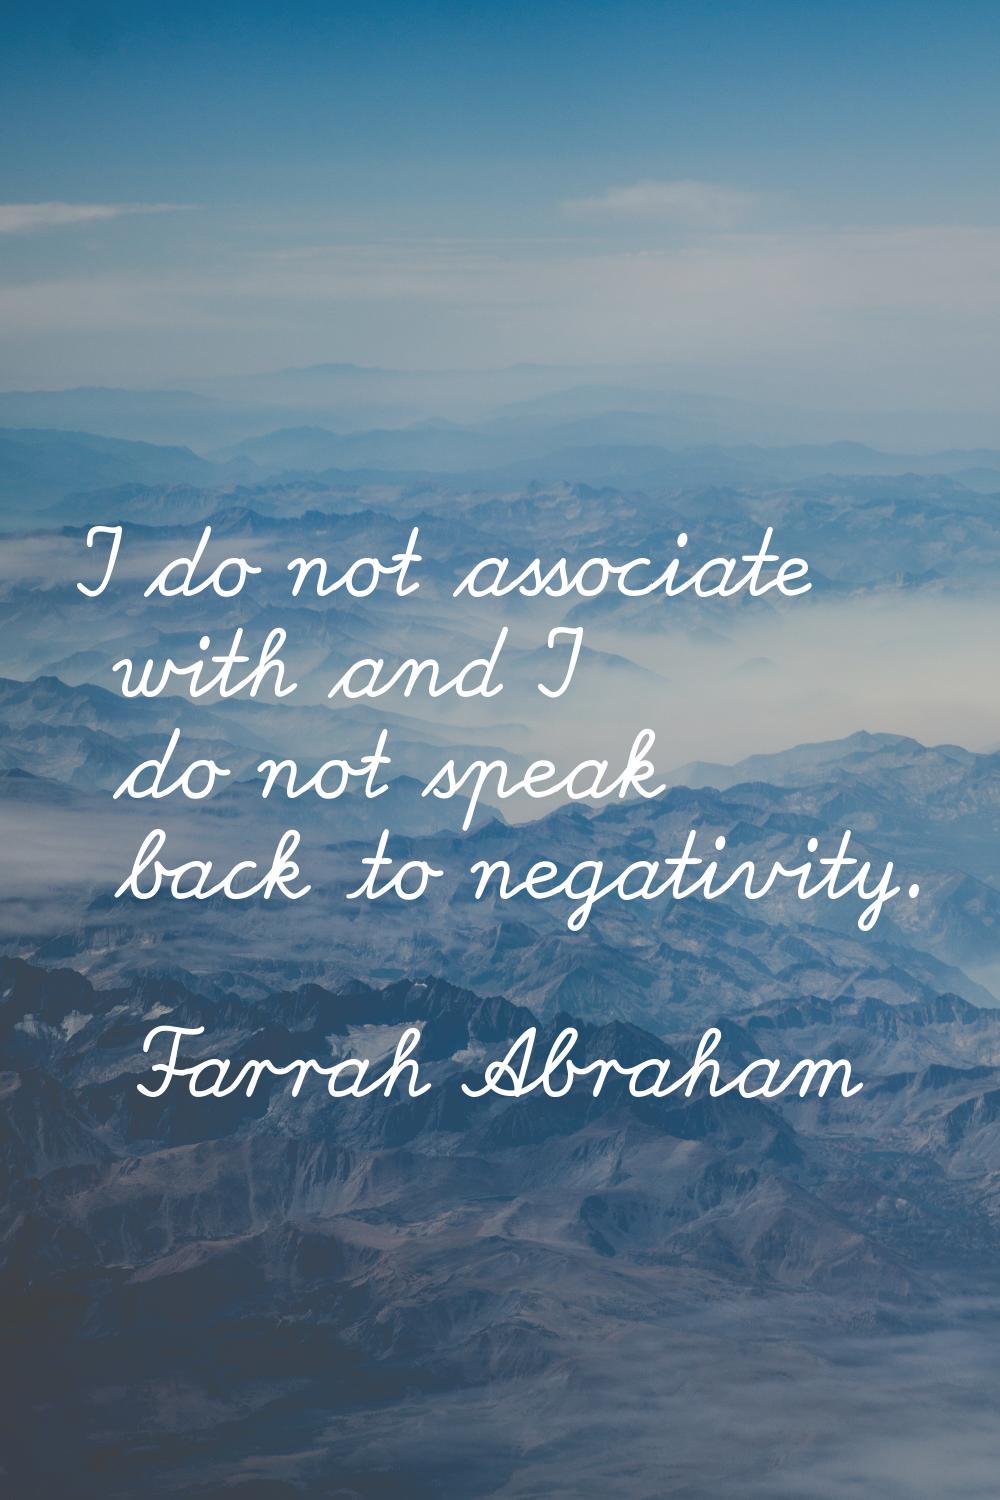 I do not associate with and I do not speak back to negativity.